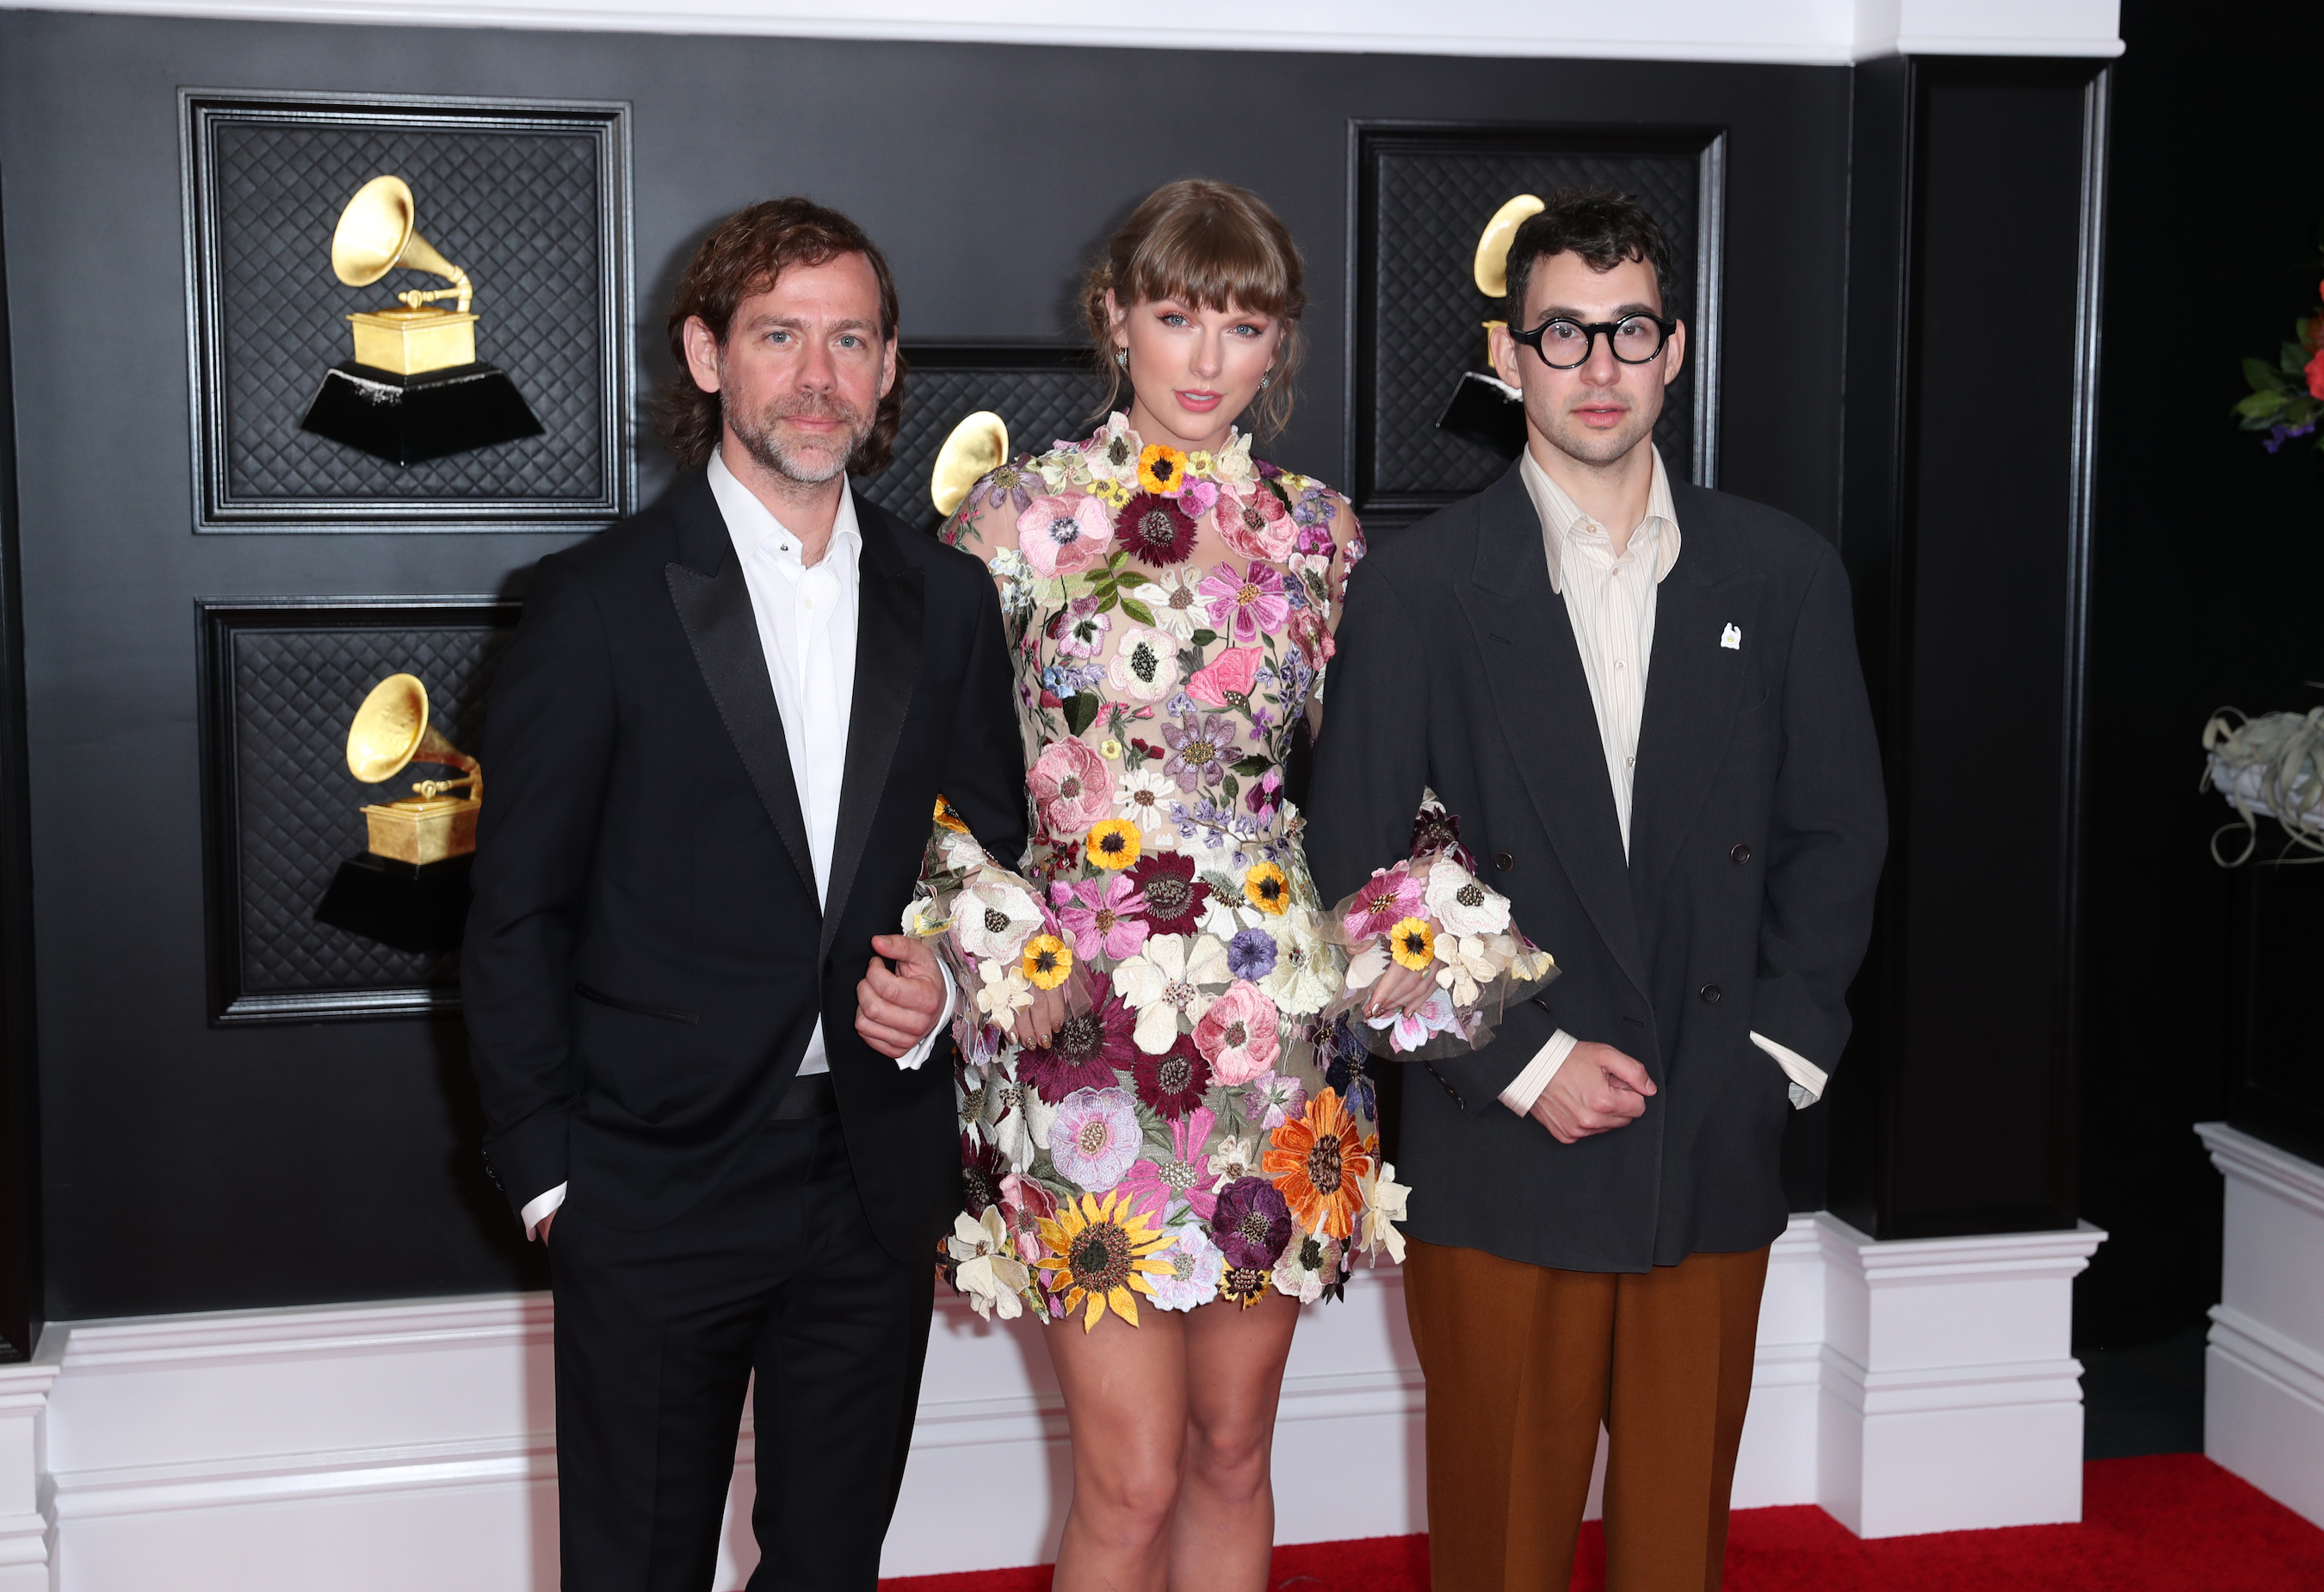 Before Meeting Taylor Swift, Jack Antonoff Wasn’t a 'Producer'